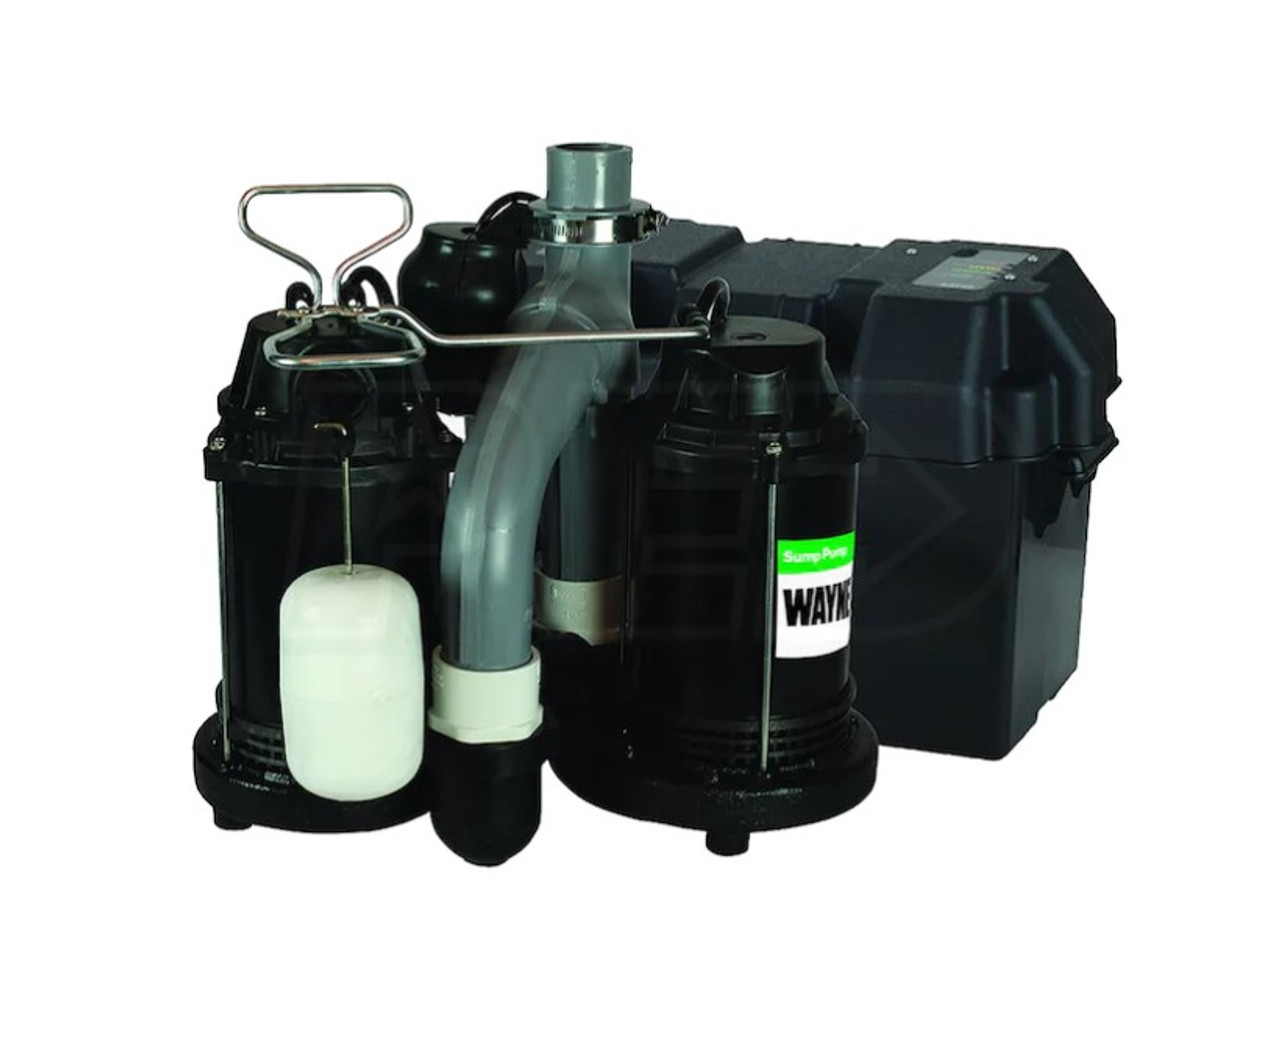 Wayne 1/2 HP Combo Battery Backup System, Vertical Float Switch, Coated Steel & Cast Iron